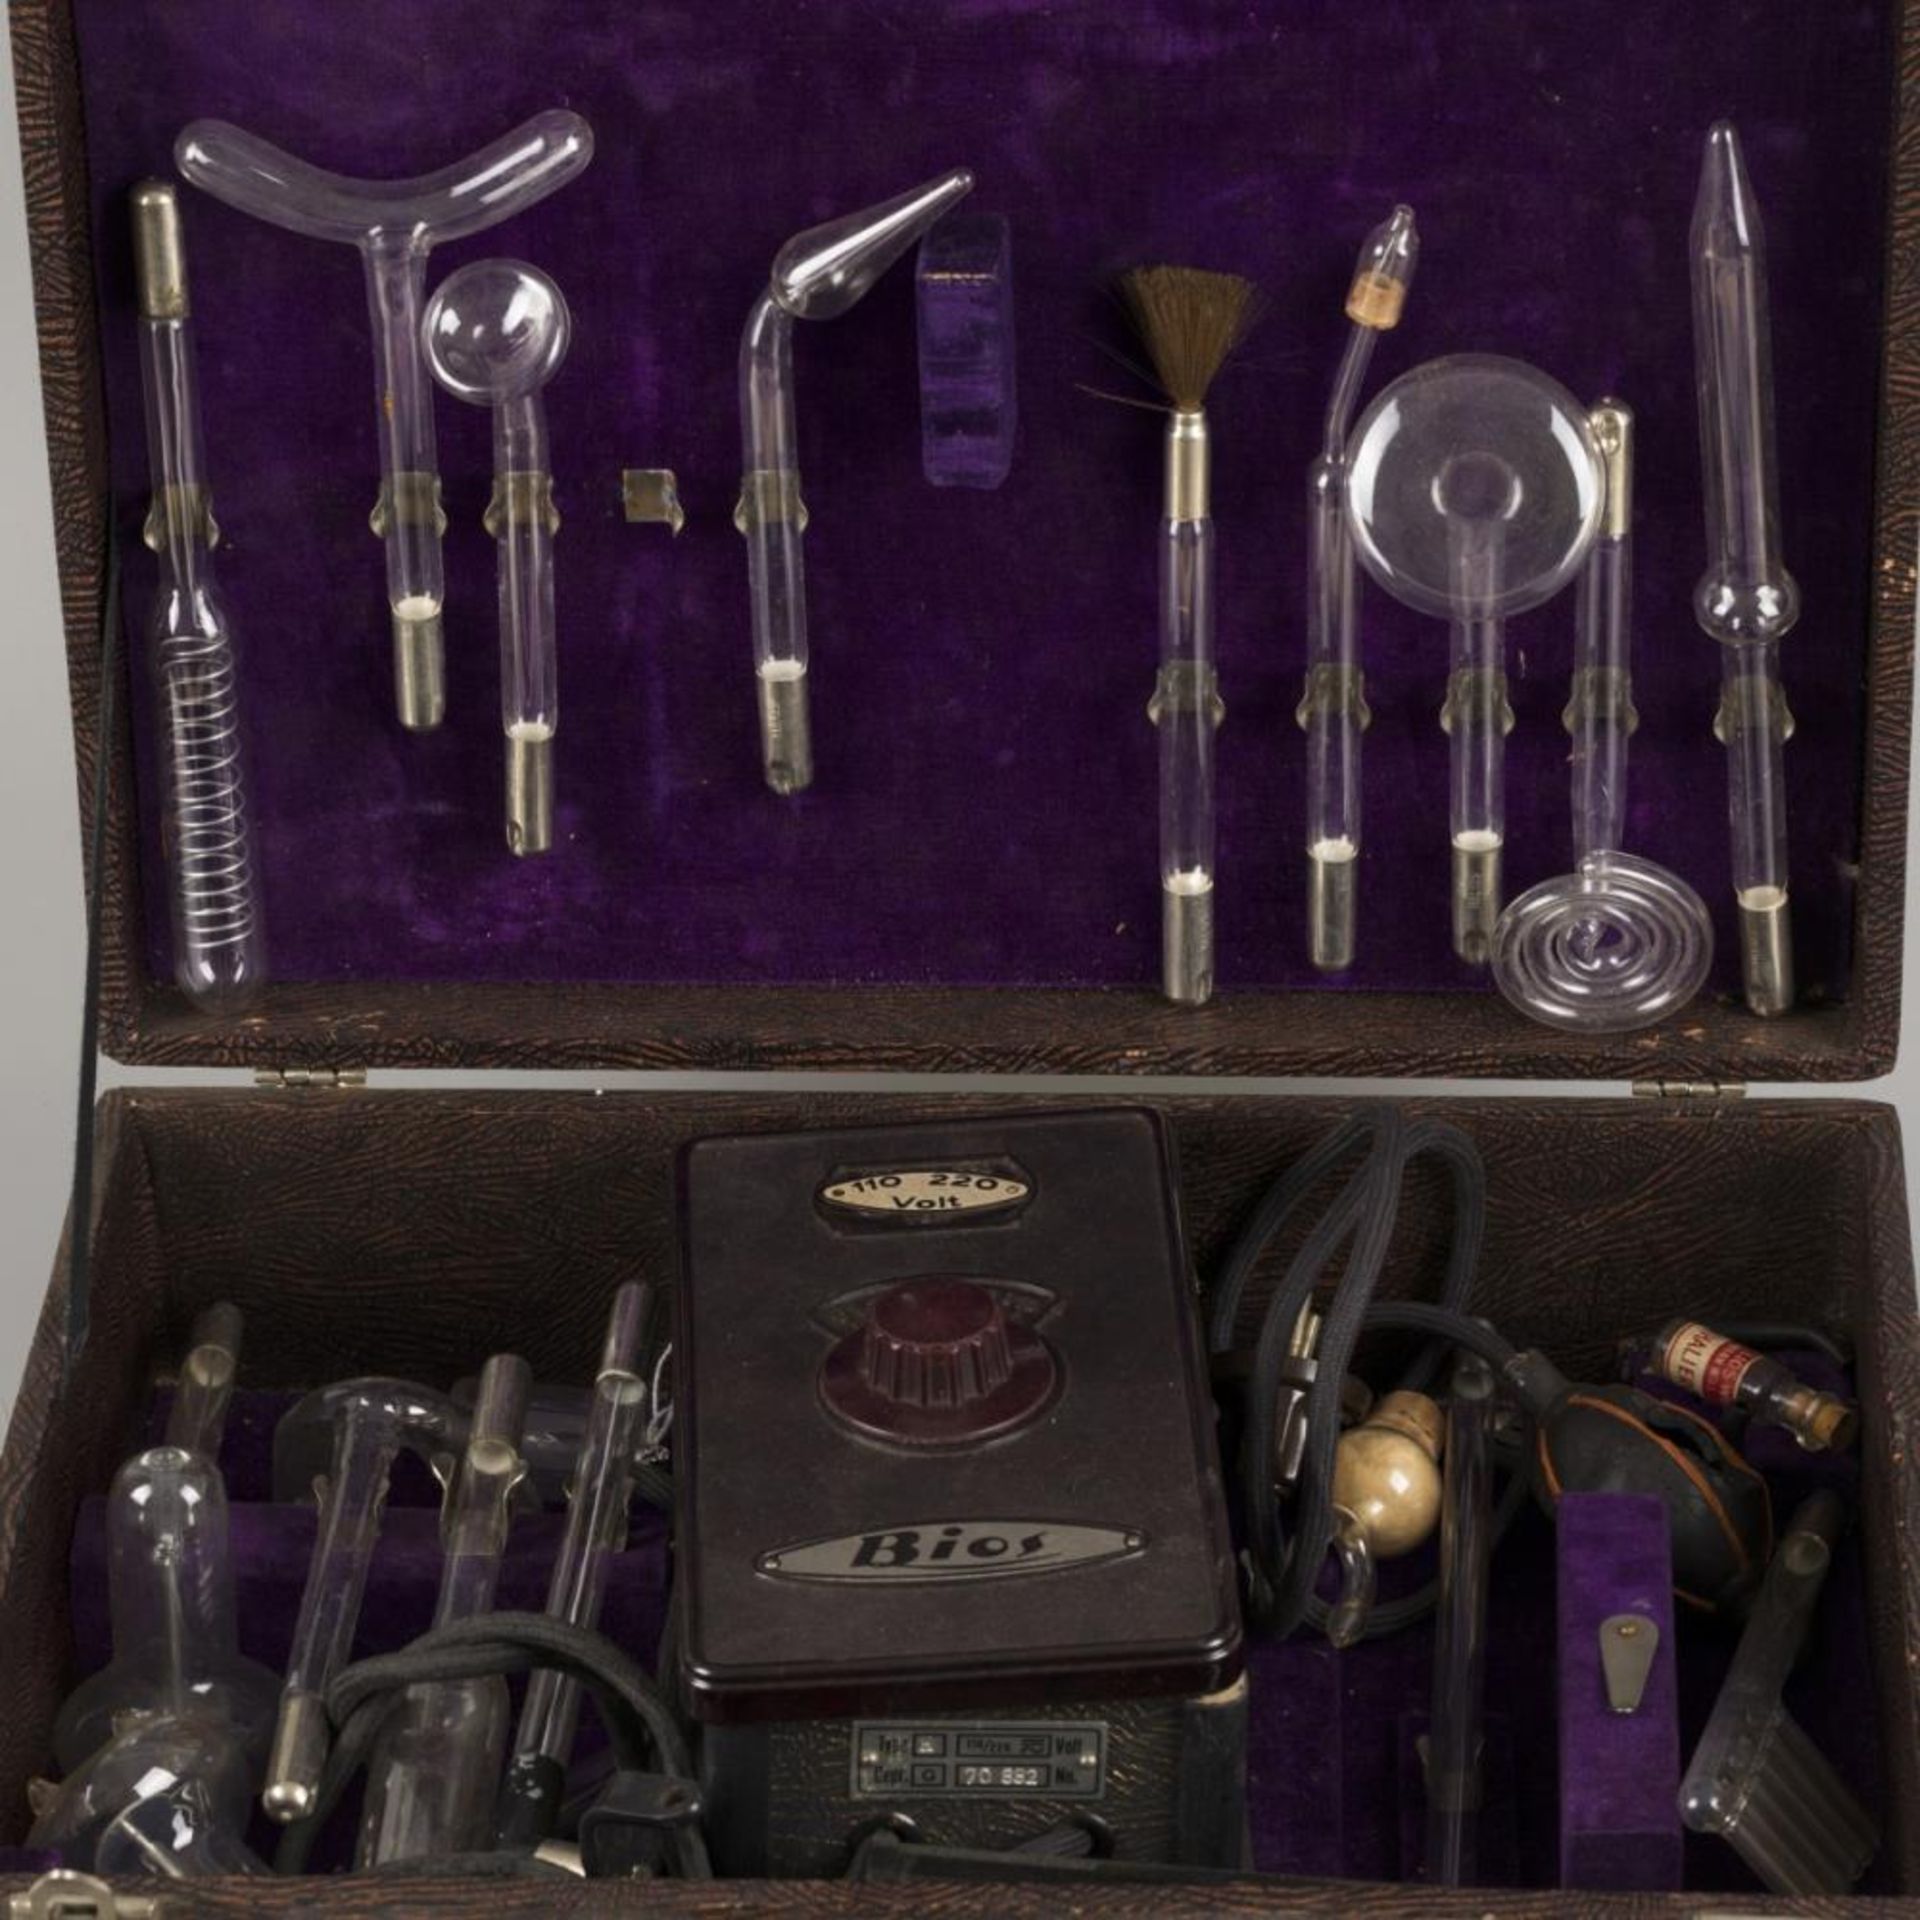 A 'Helios' set medical instruments for ultraviolet light therapy in case, Germany, 1920's. - Image 2 of 3